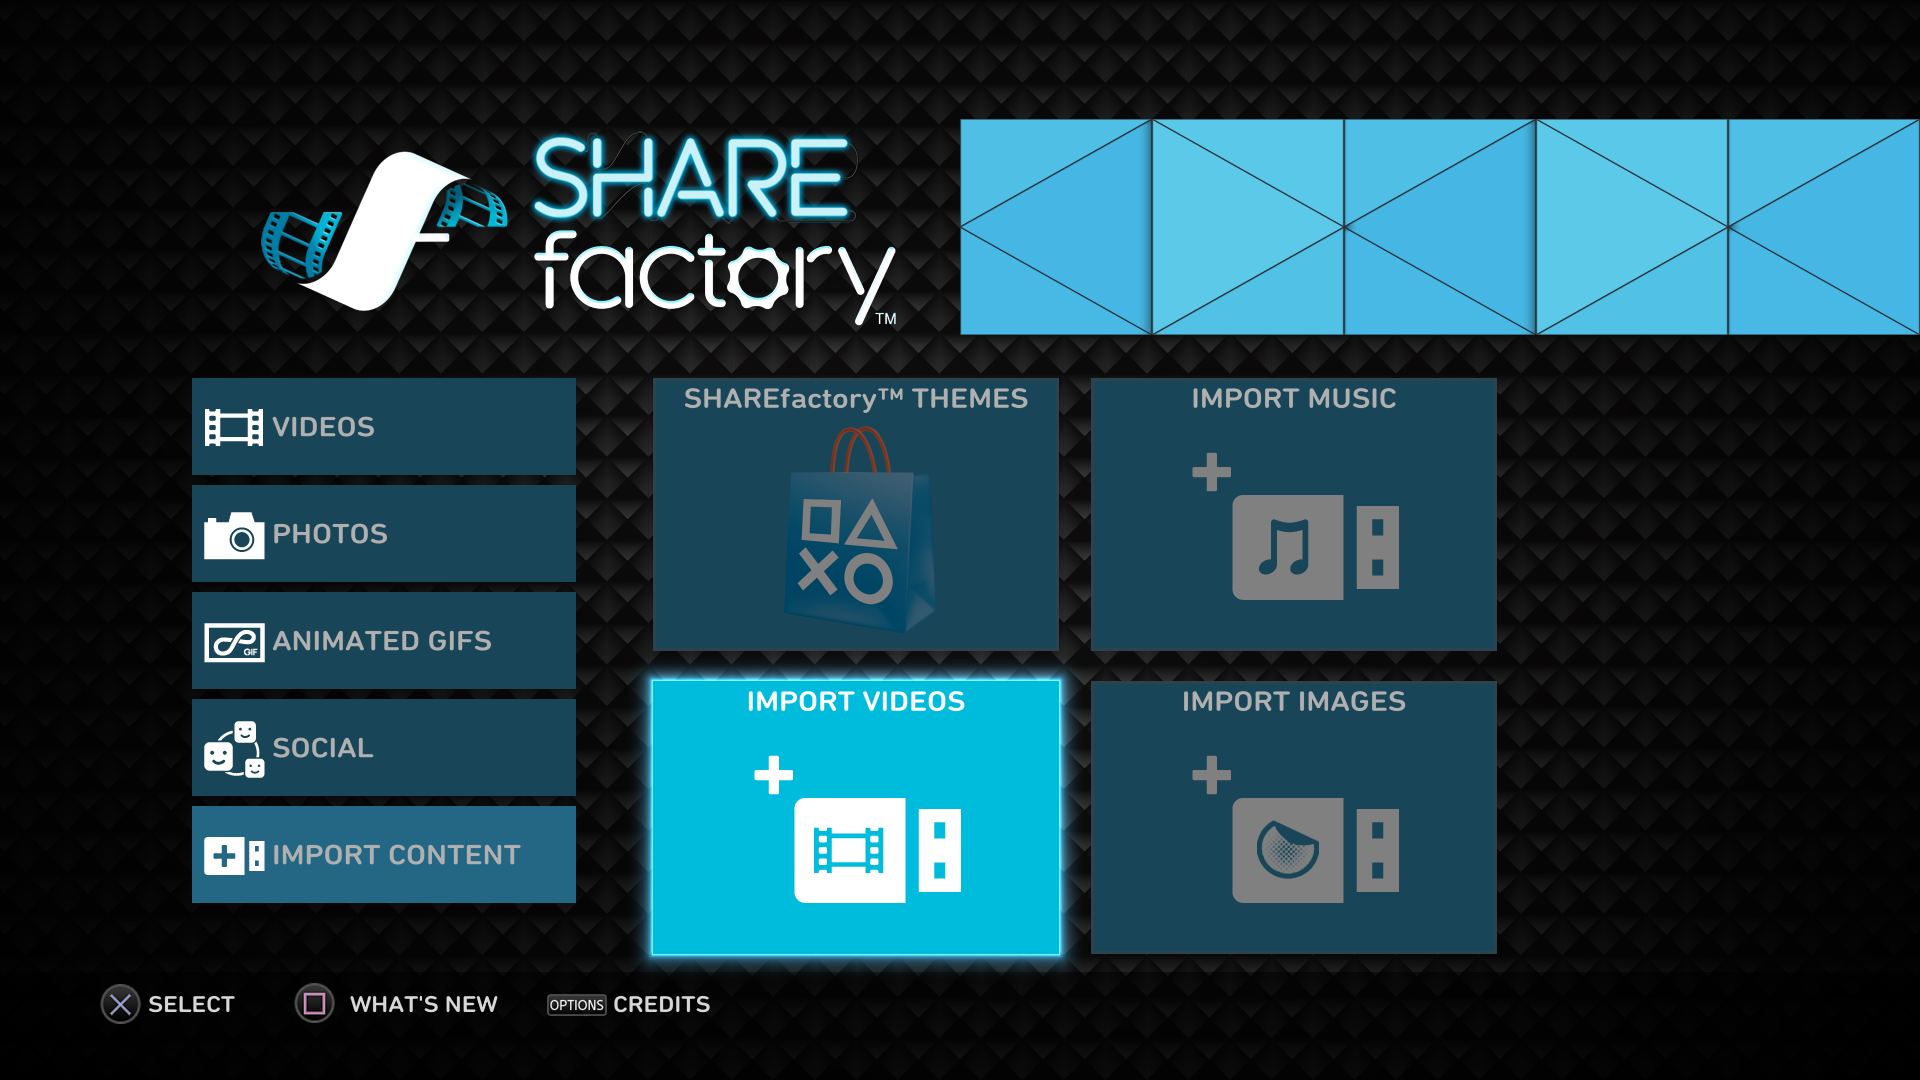 Import video. SHAREFACTORY. Share Factory. SHAREFACTORY Theme. Factory Theme.